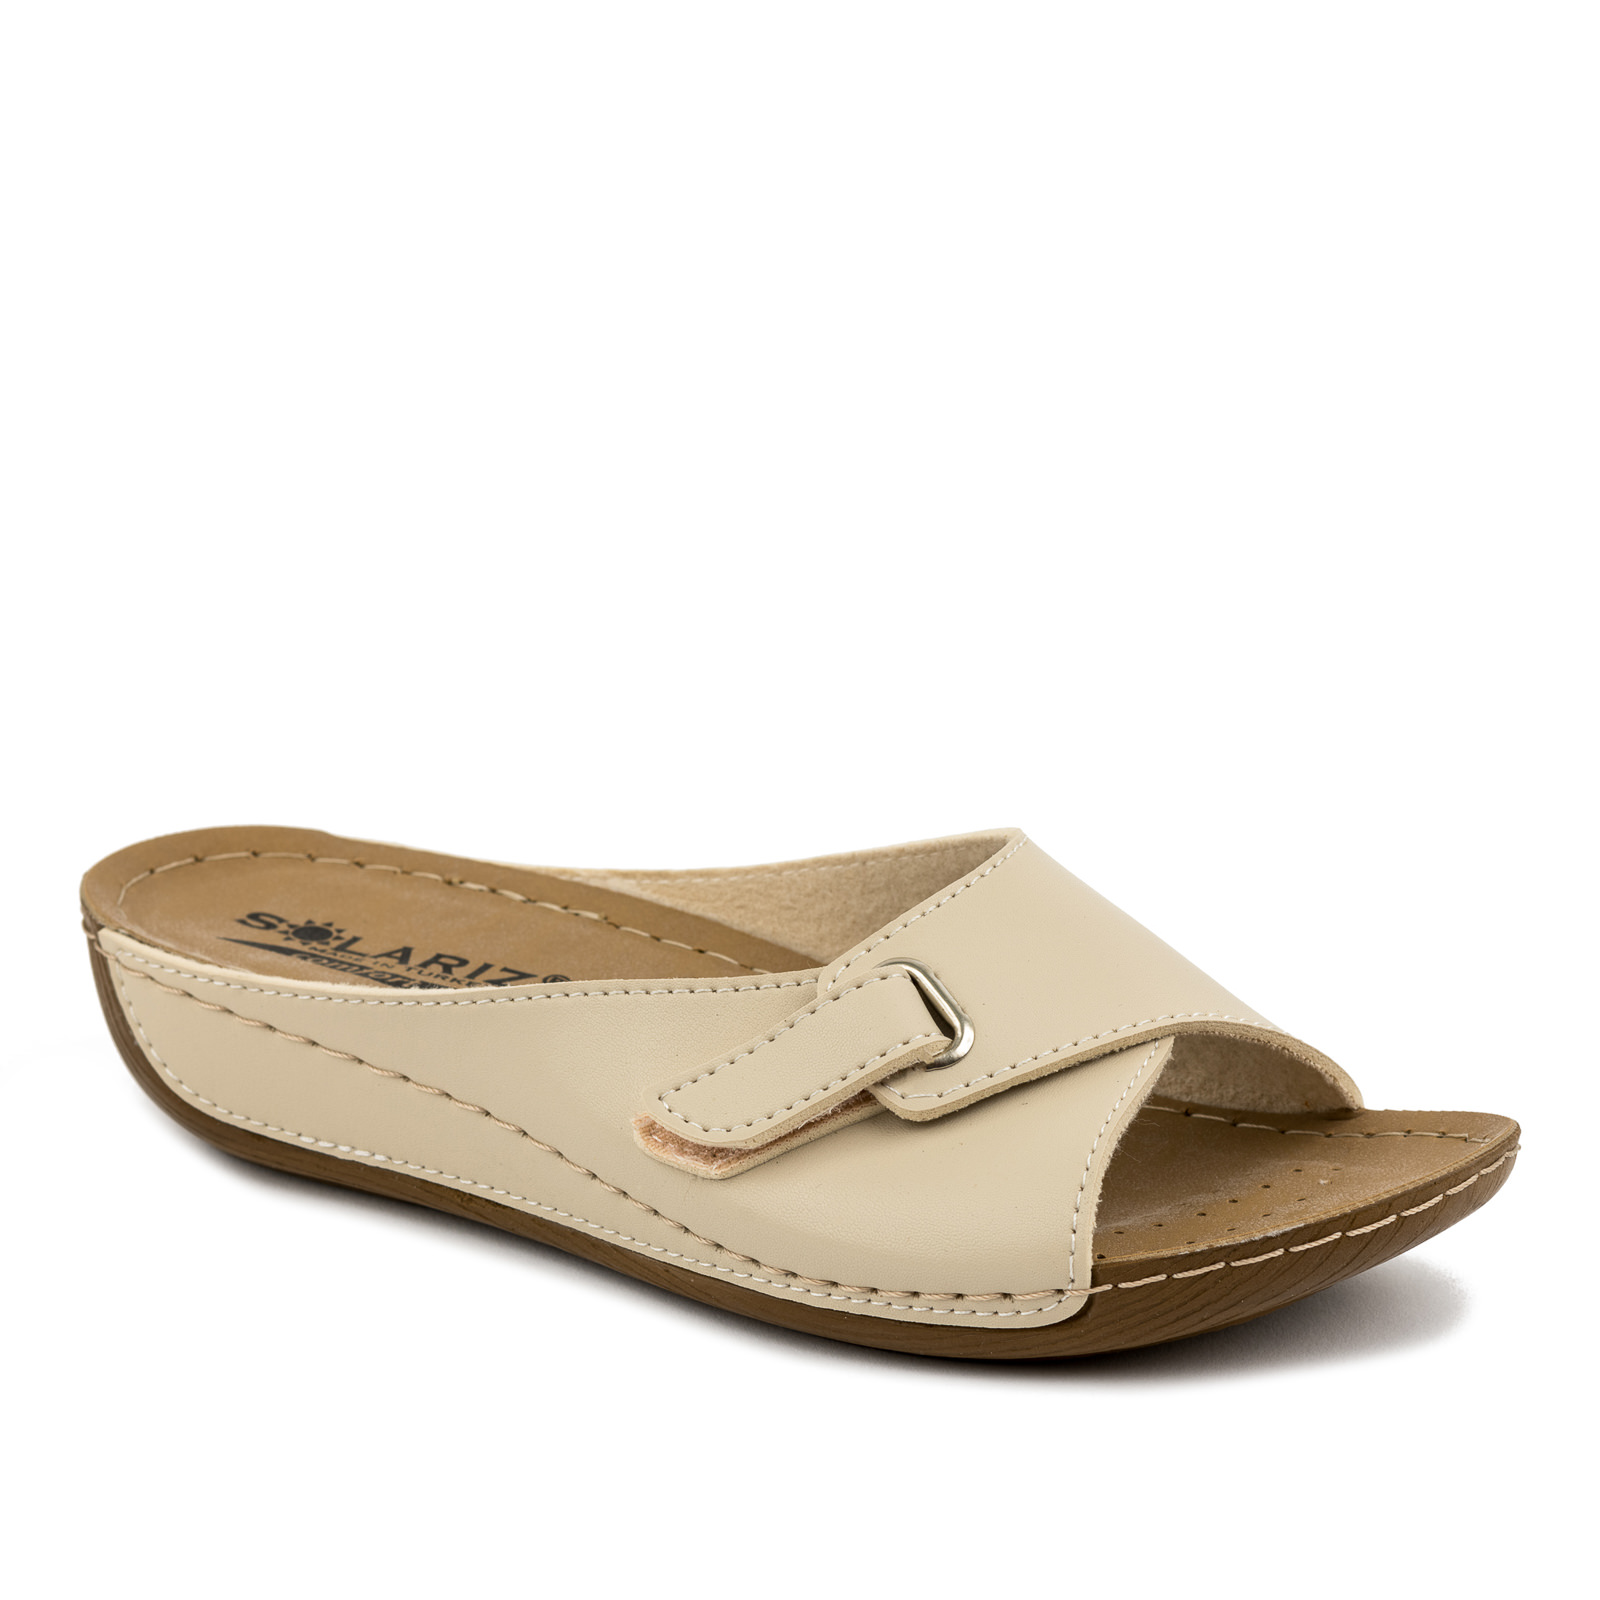 ANATOMICAL SLIPPERS WITH HIGHER SOLE AND VELCRO BAND -  LIGHT BEIGE